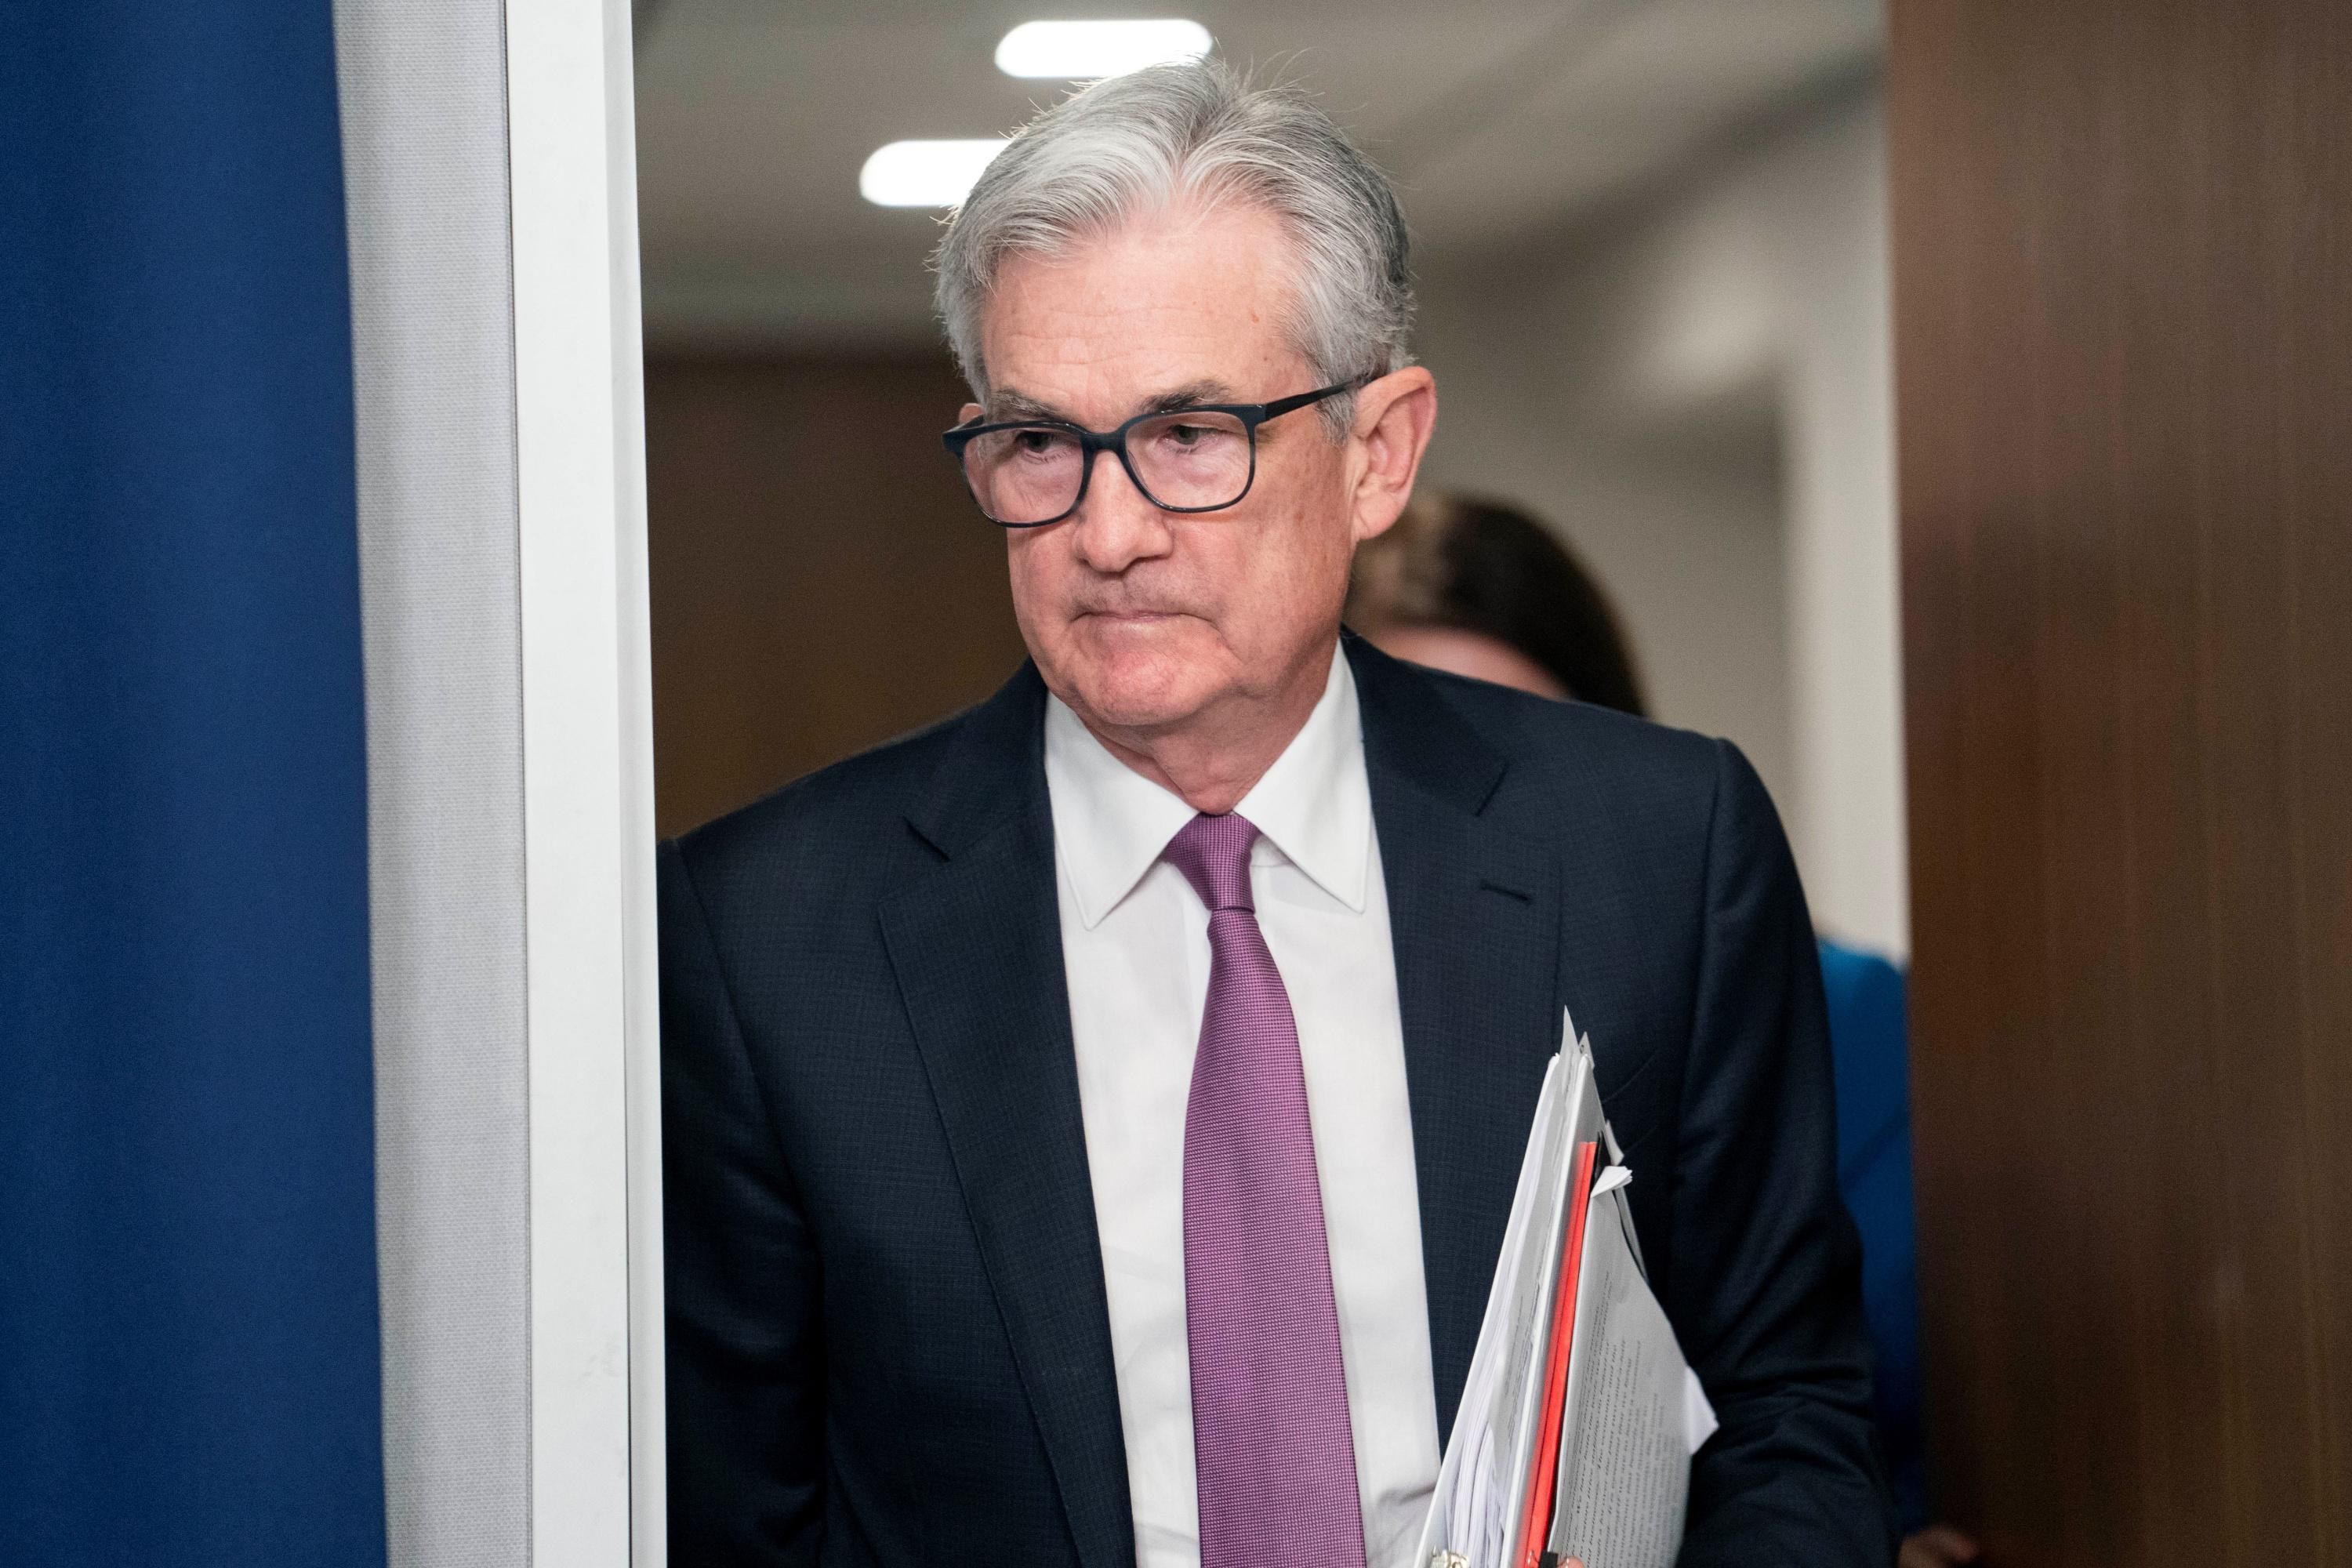 Fed chair Jerome Powell walks to a press conference